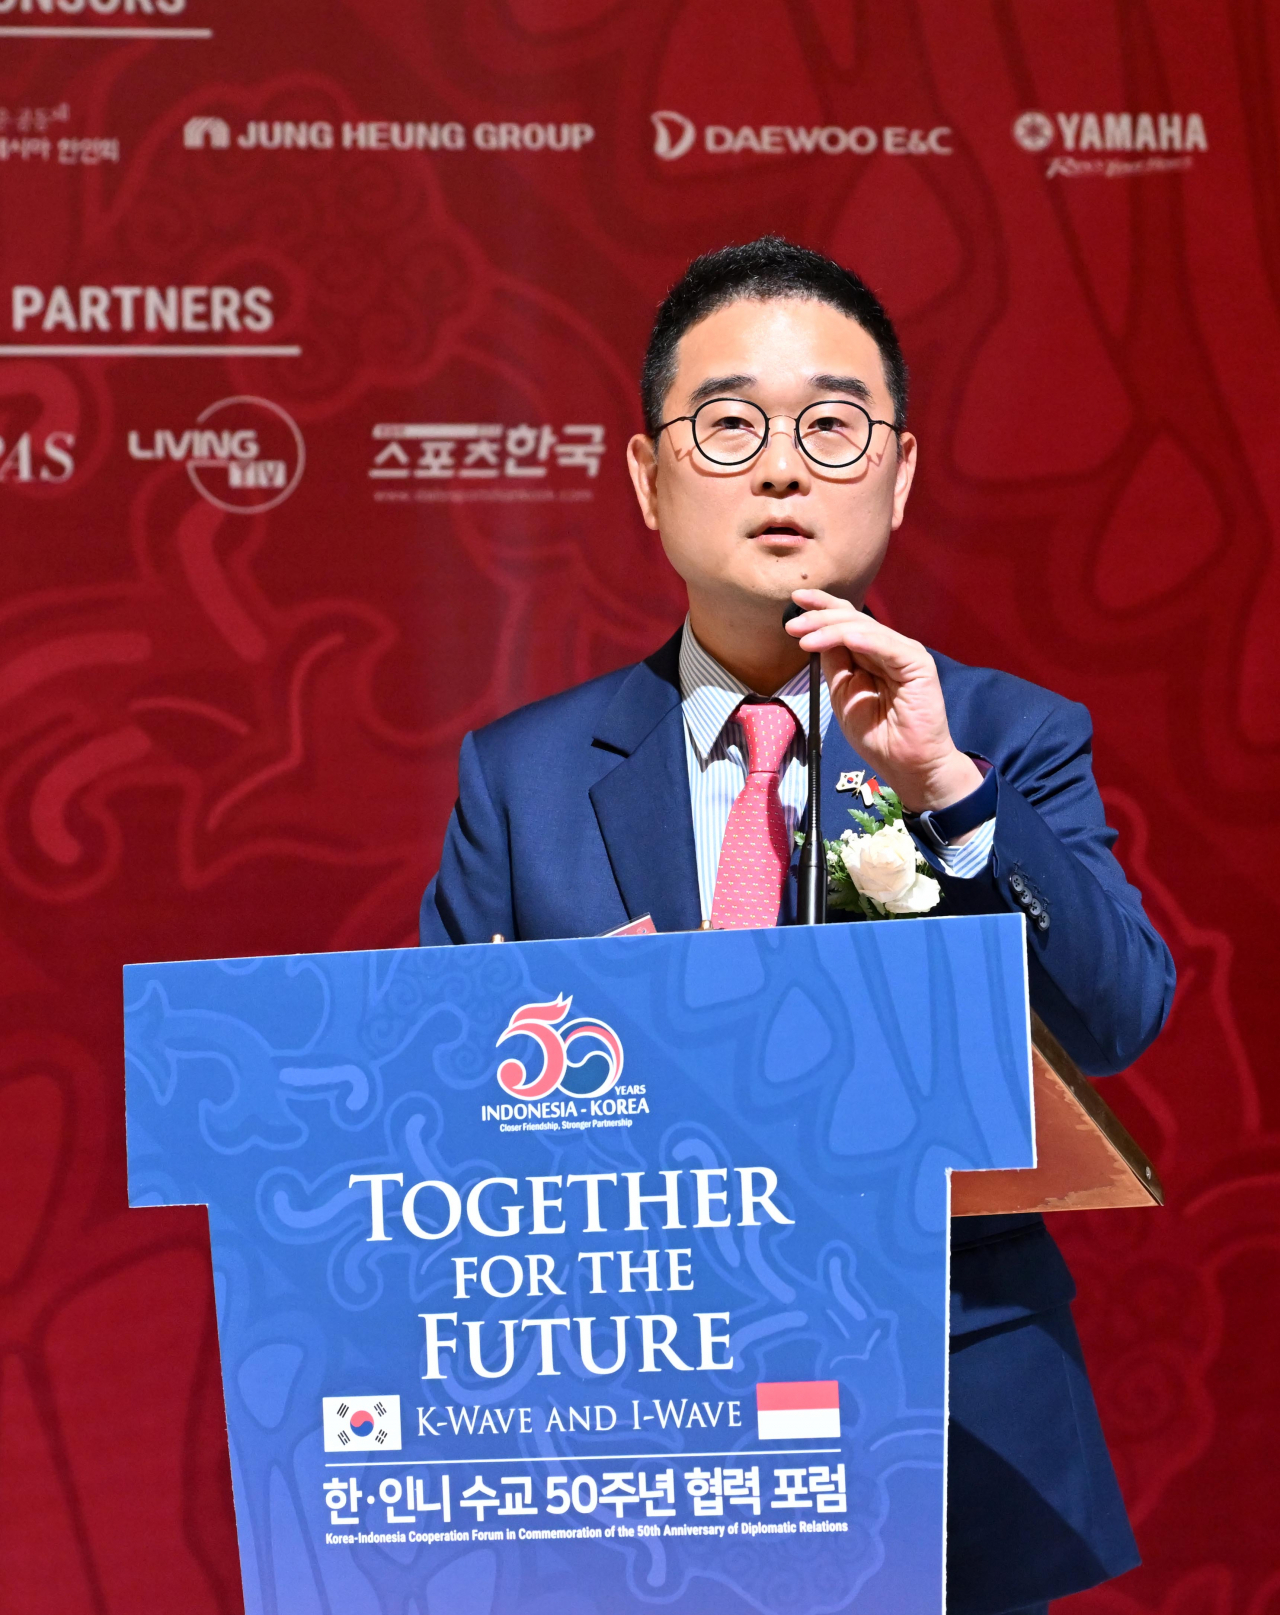 Mirae Asset Sekuritas Indonesia President Director Shim Tae-yong speaks during the Korea-Indonesia Cooperation Forum held to mark the 50th anniversary of bilateral diplomatic ties between Korea and Indonesia in Jakarta on Thursday. (Lee Sang-sub/The Korea Herald)